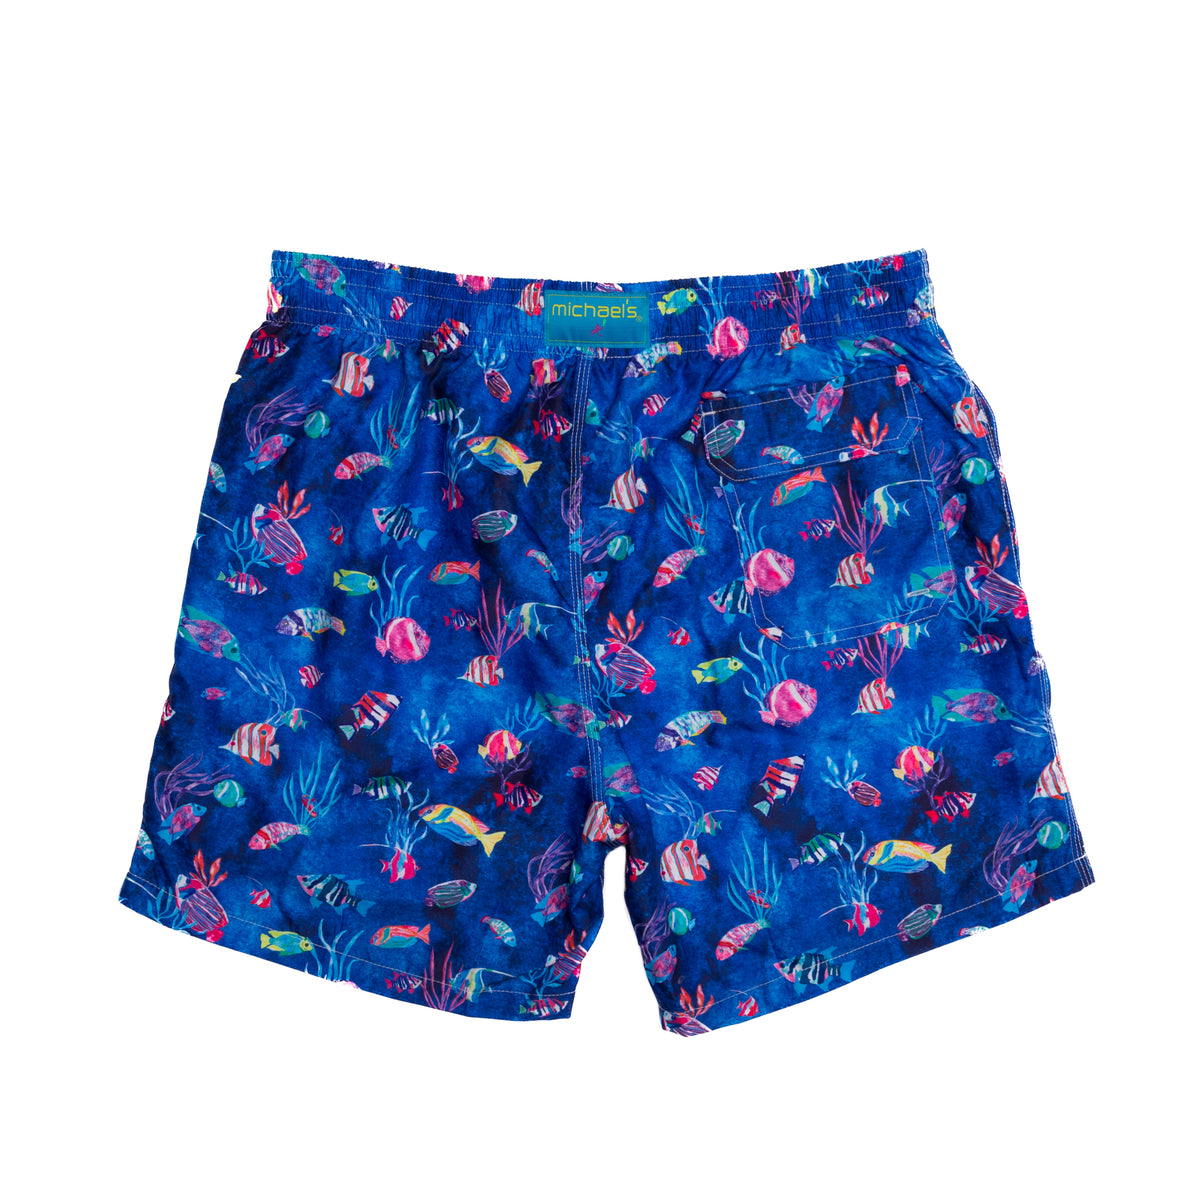 Blue swim trunks with tropical reef pattern for boys, back view